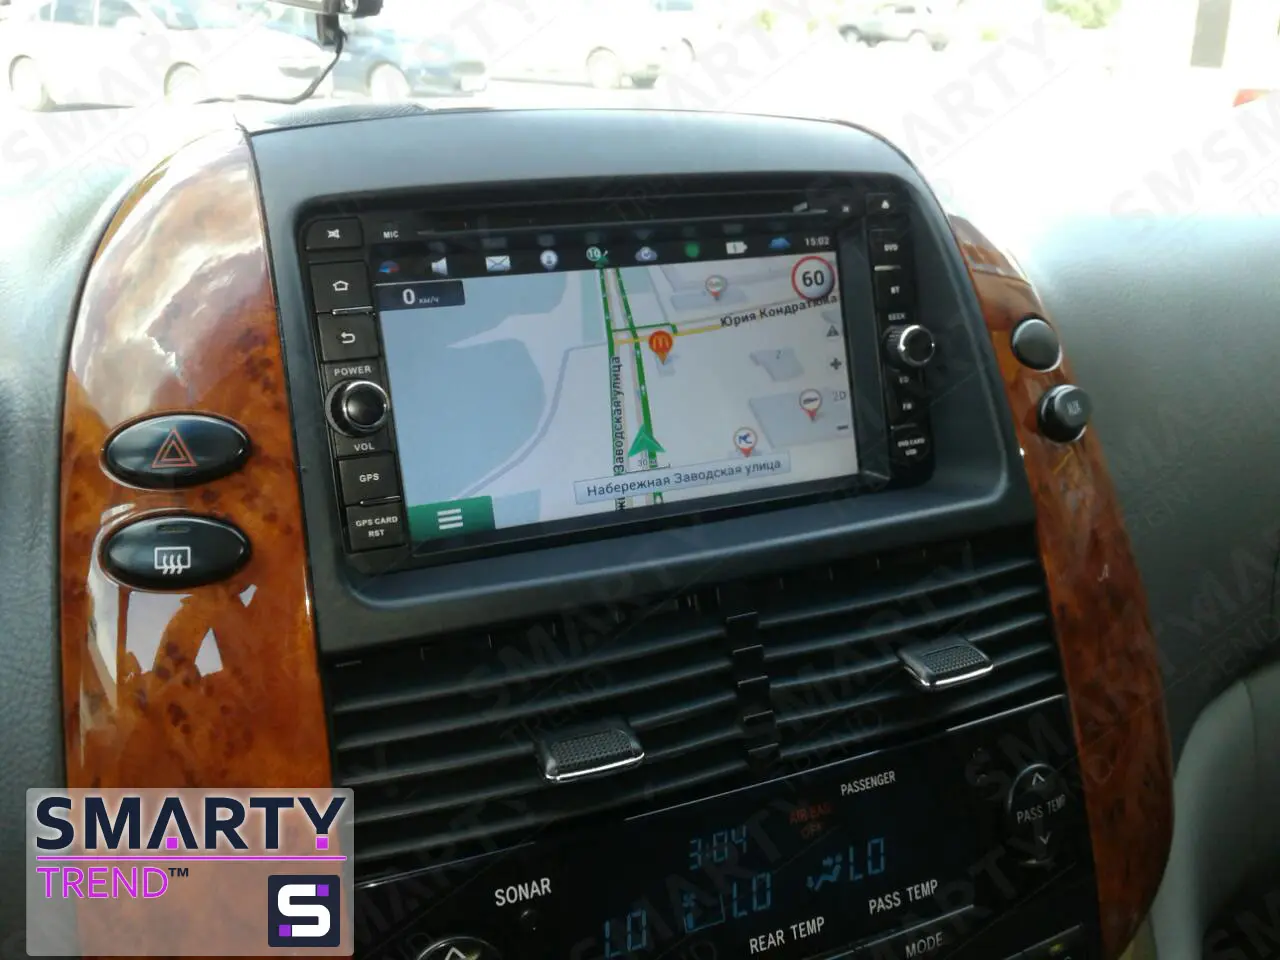 The Smarty Trend head unit for Toyota Sienna